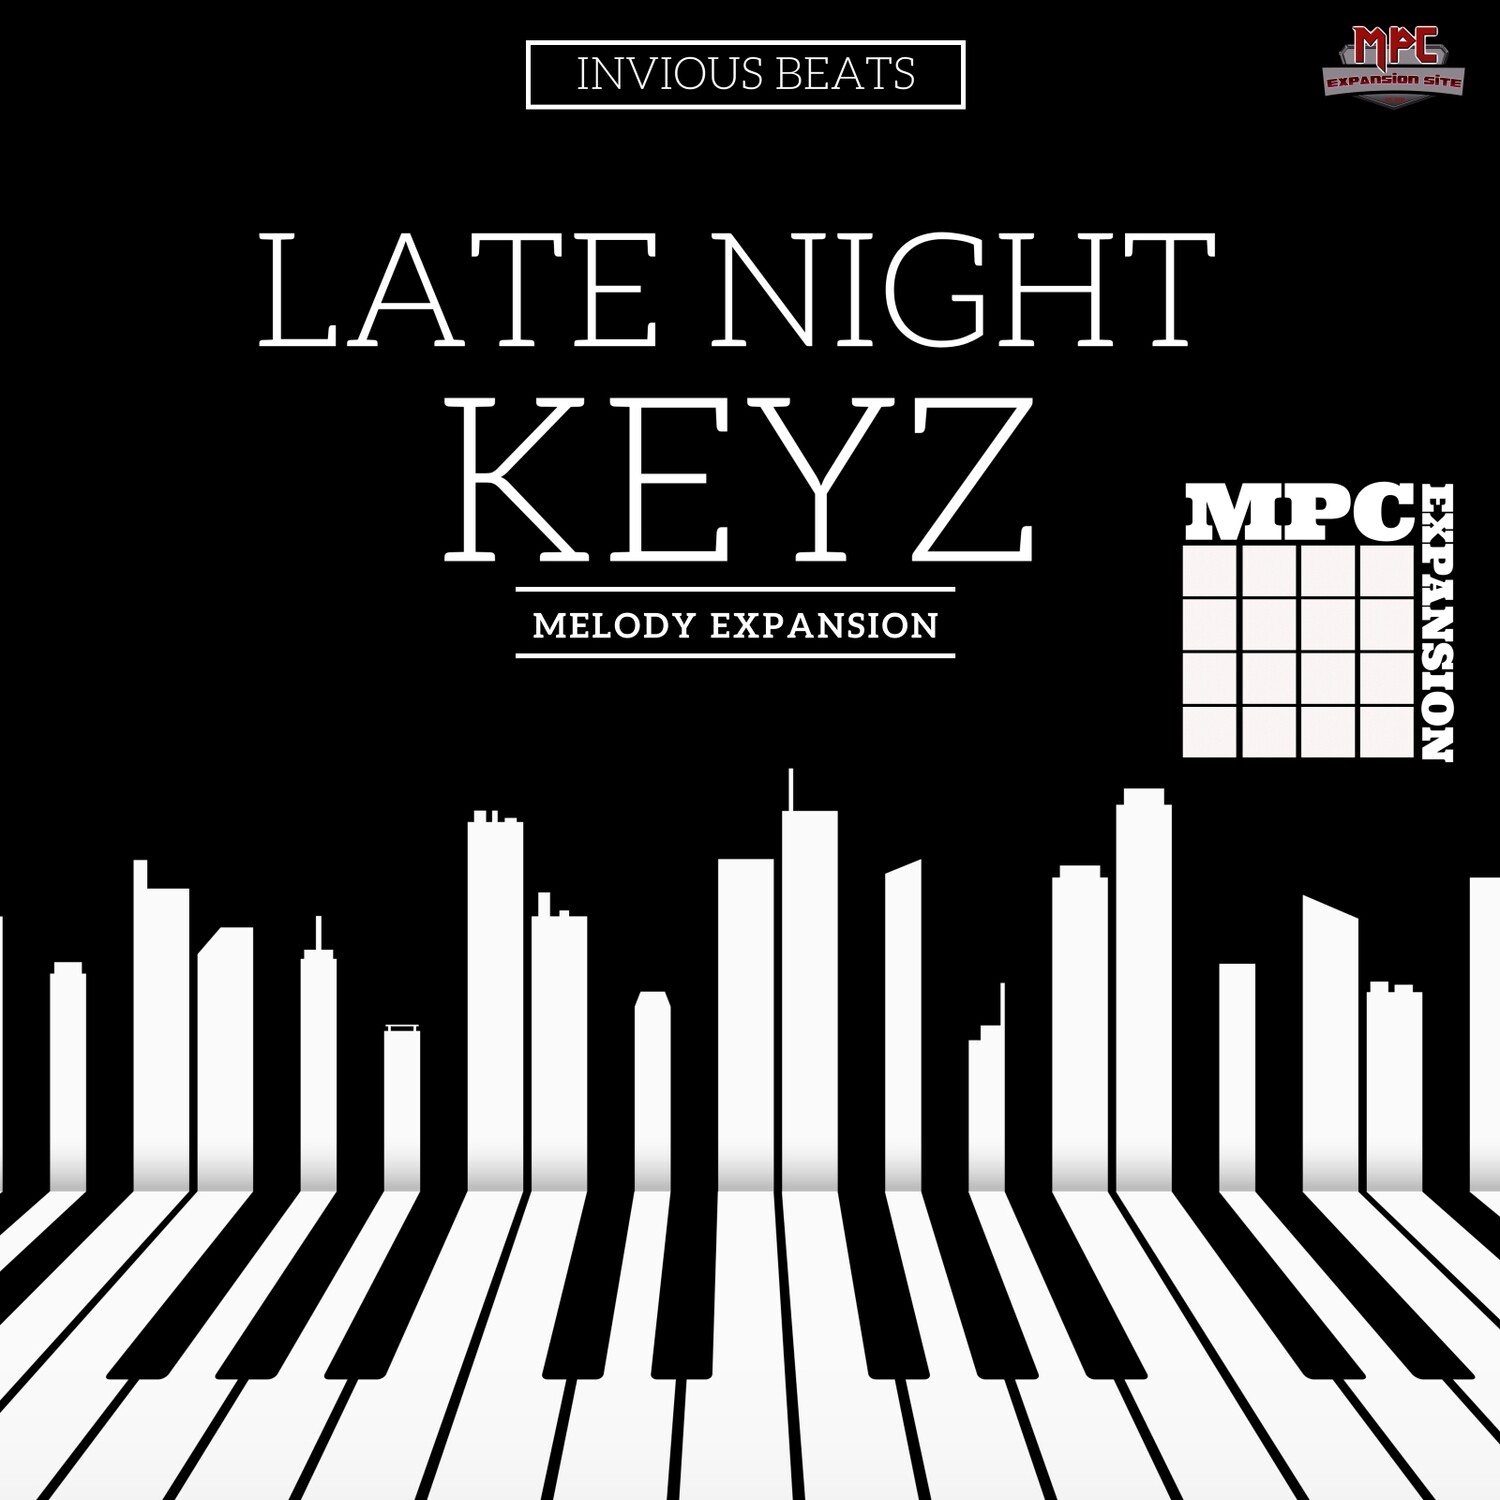 MPC EXPANSION 'LATE NIGHT KEYZ' by INVIOUS